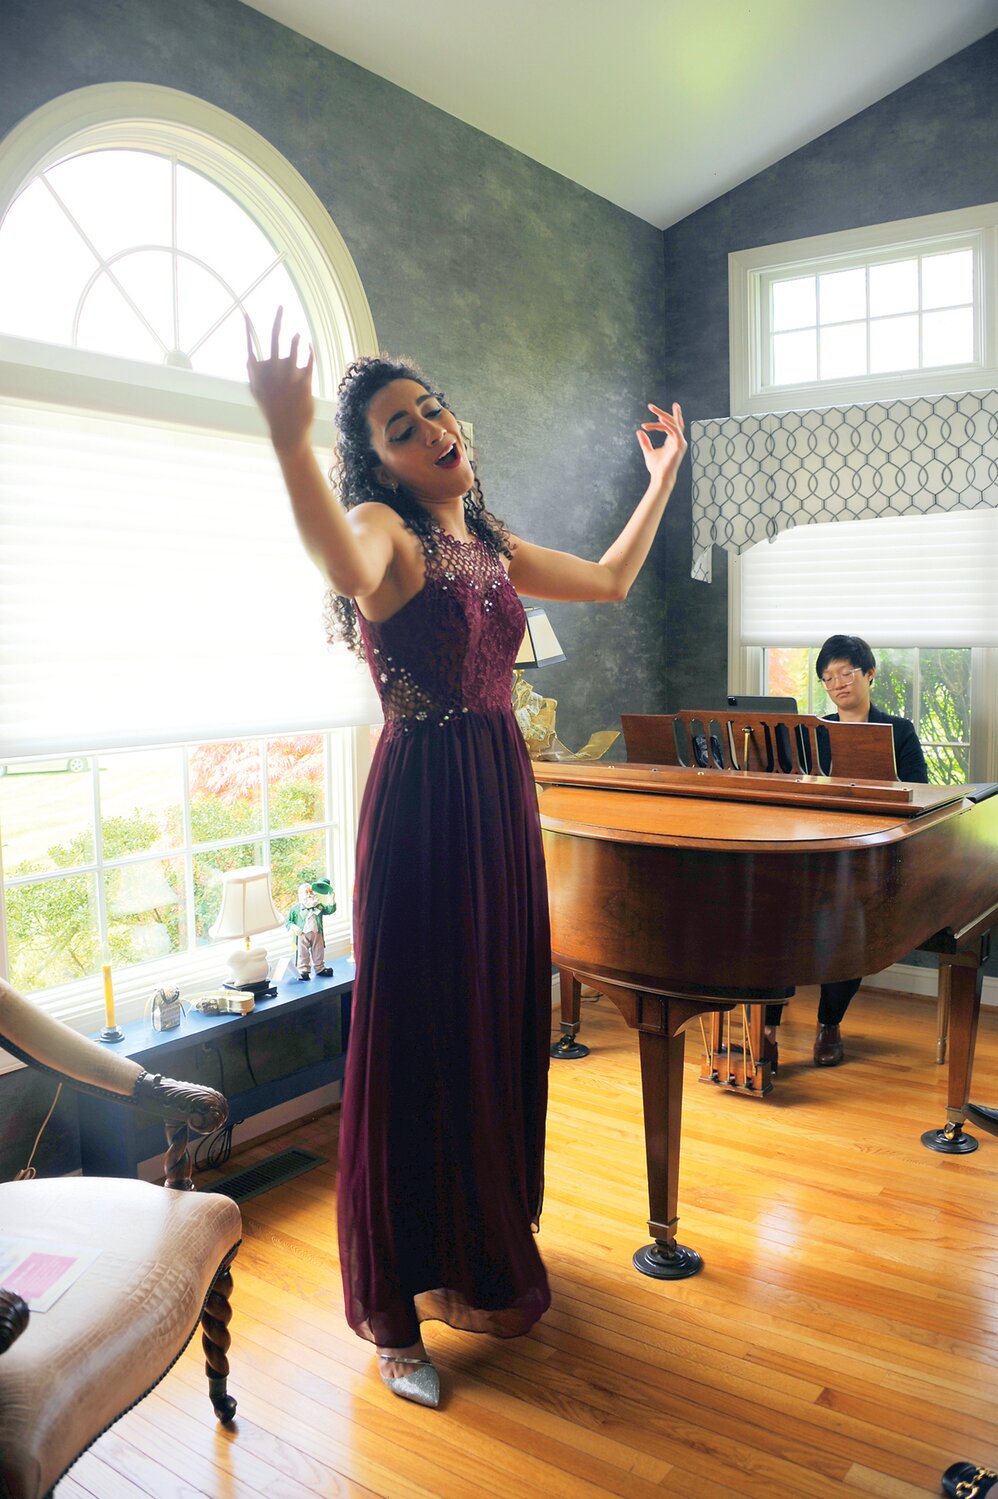 Mezzo-soprano Monique Galvao, of Brazil, is a third-year resident artist at the Academy of Vocal Arts.